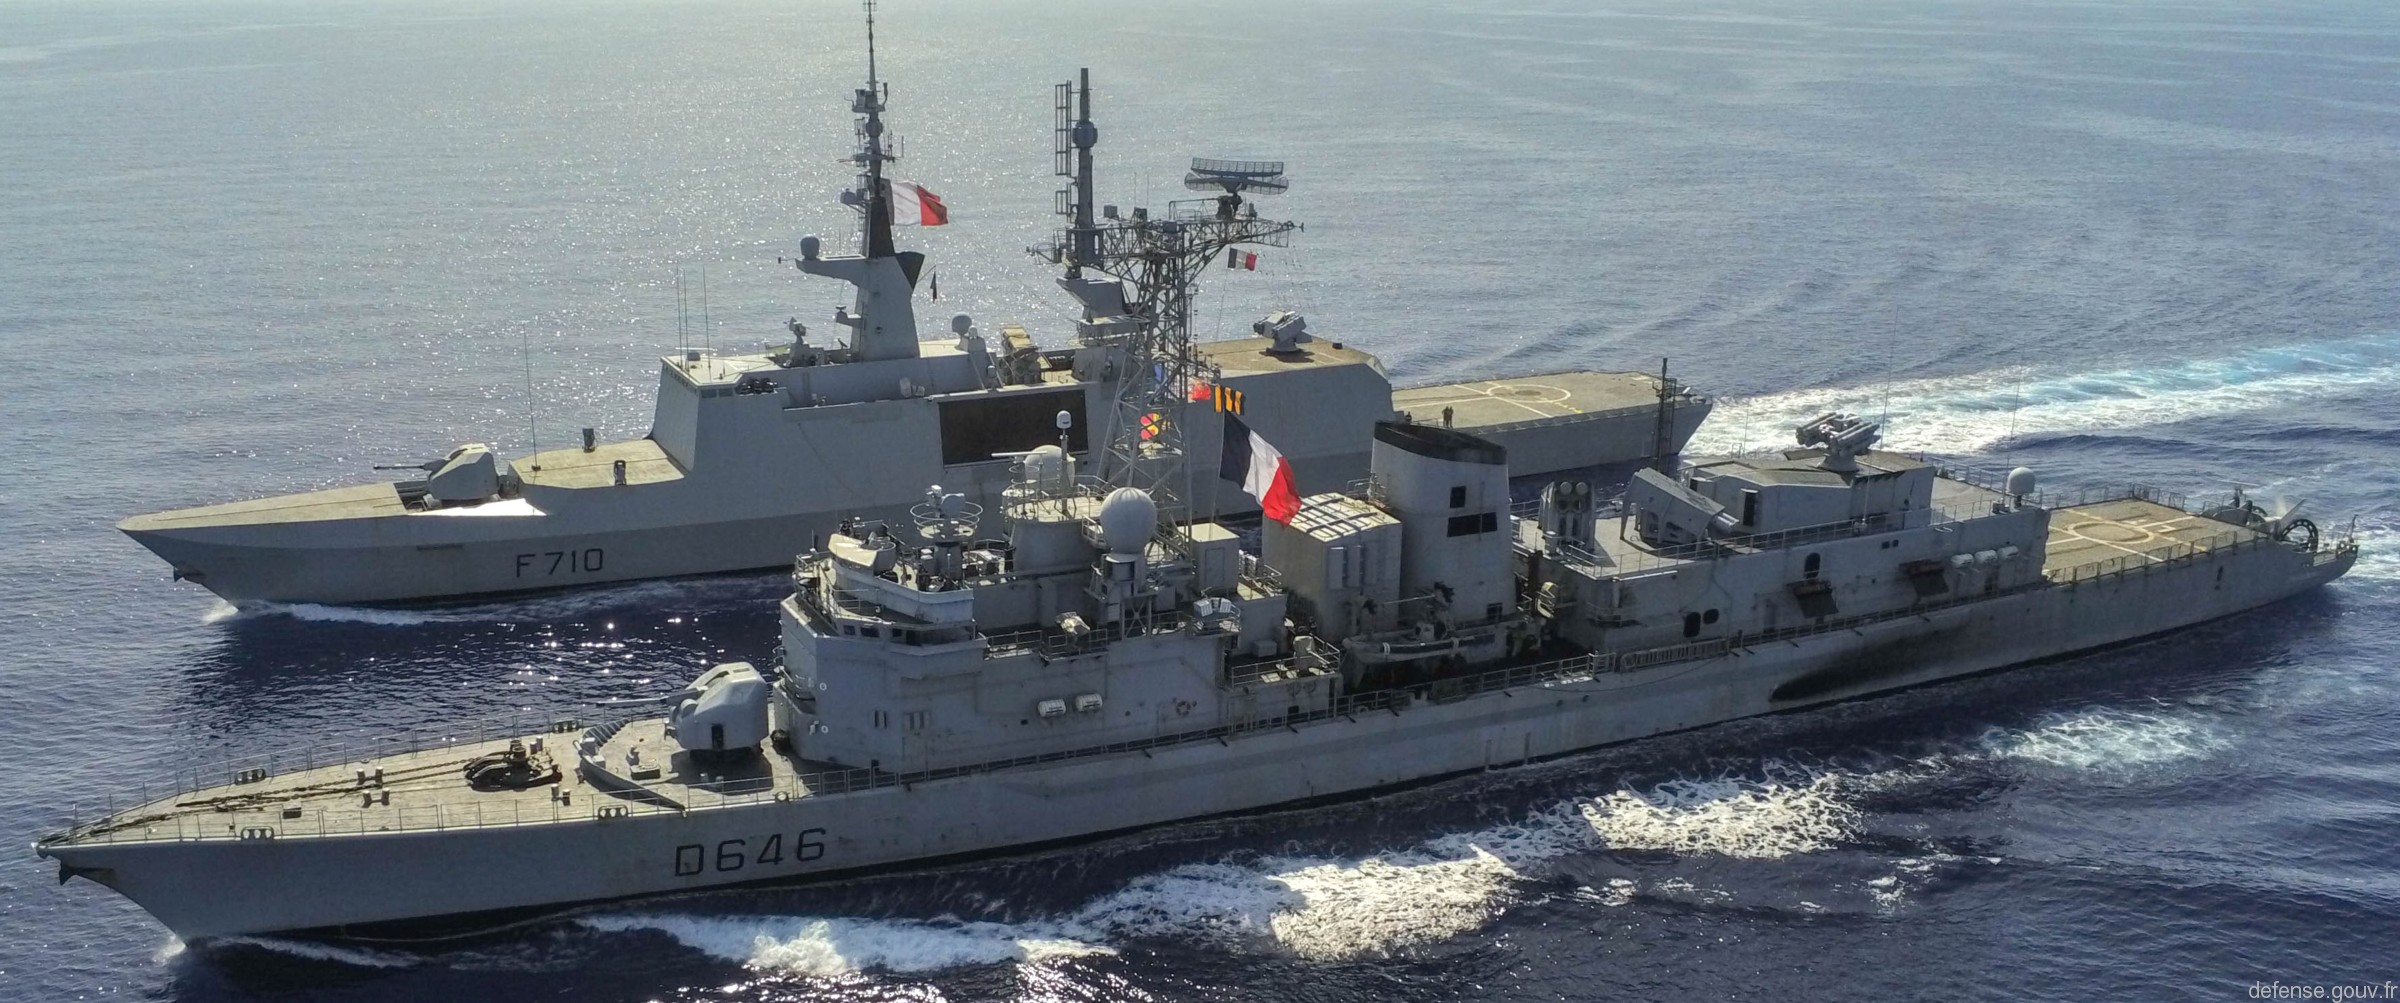 d-646 fs latouche treville f70as frigate destroyer asw french navy marine nationale 28